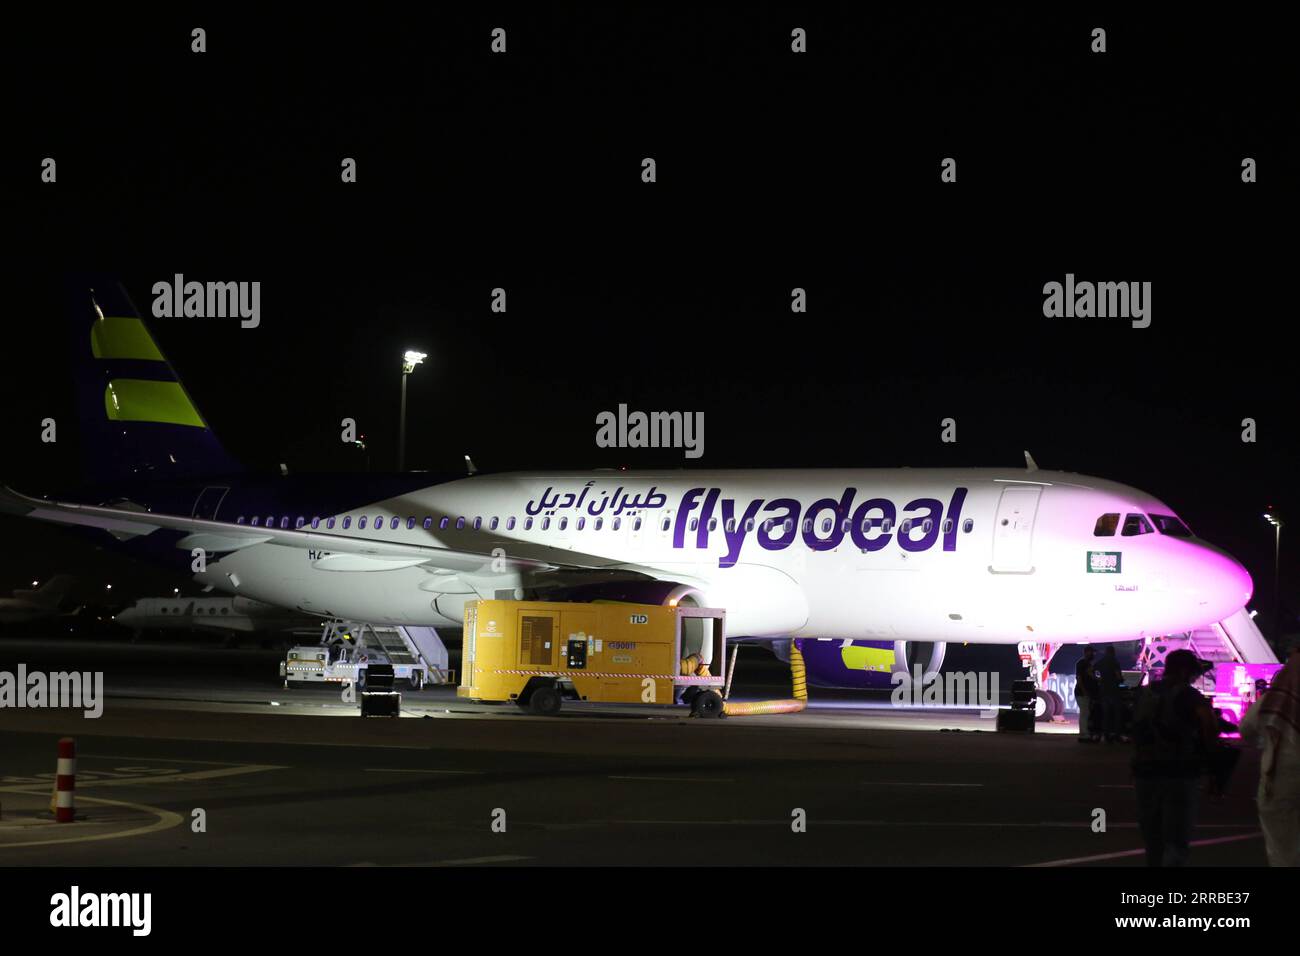 210916 -- JEDDAH, Sept. 16, 2021 -- Photo taken on Sept. 15, 2021 shows the Airbus A320neo jet received by Flyadeal at King Abdulaziz International Airport in Jeddah, Saudi Arabia. Flyadeal, a low-cost Saudi Arabian airline, officially inaugurated on Wednesday its latest Airbus A320neo jet, the third delivery in three months. Flyadeal, mainly serving domestic destinations, is founded in 2017 and owned by Saudi flag carrier Saudia. It has started international operations between Riyadh and Dubai, United Arab Emirates since July.  SAUDI ARABIA-JEDDAH-FLYADEAL AIRLINE-AIRBUS A320NEO WangxHaizhou Stock Photo